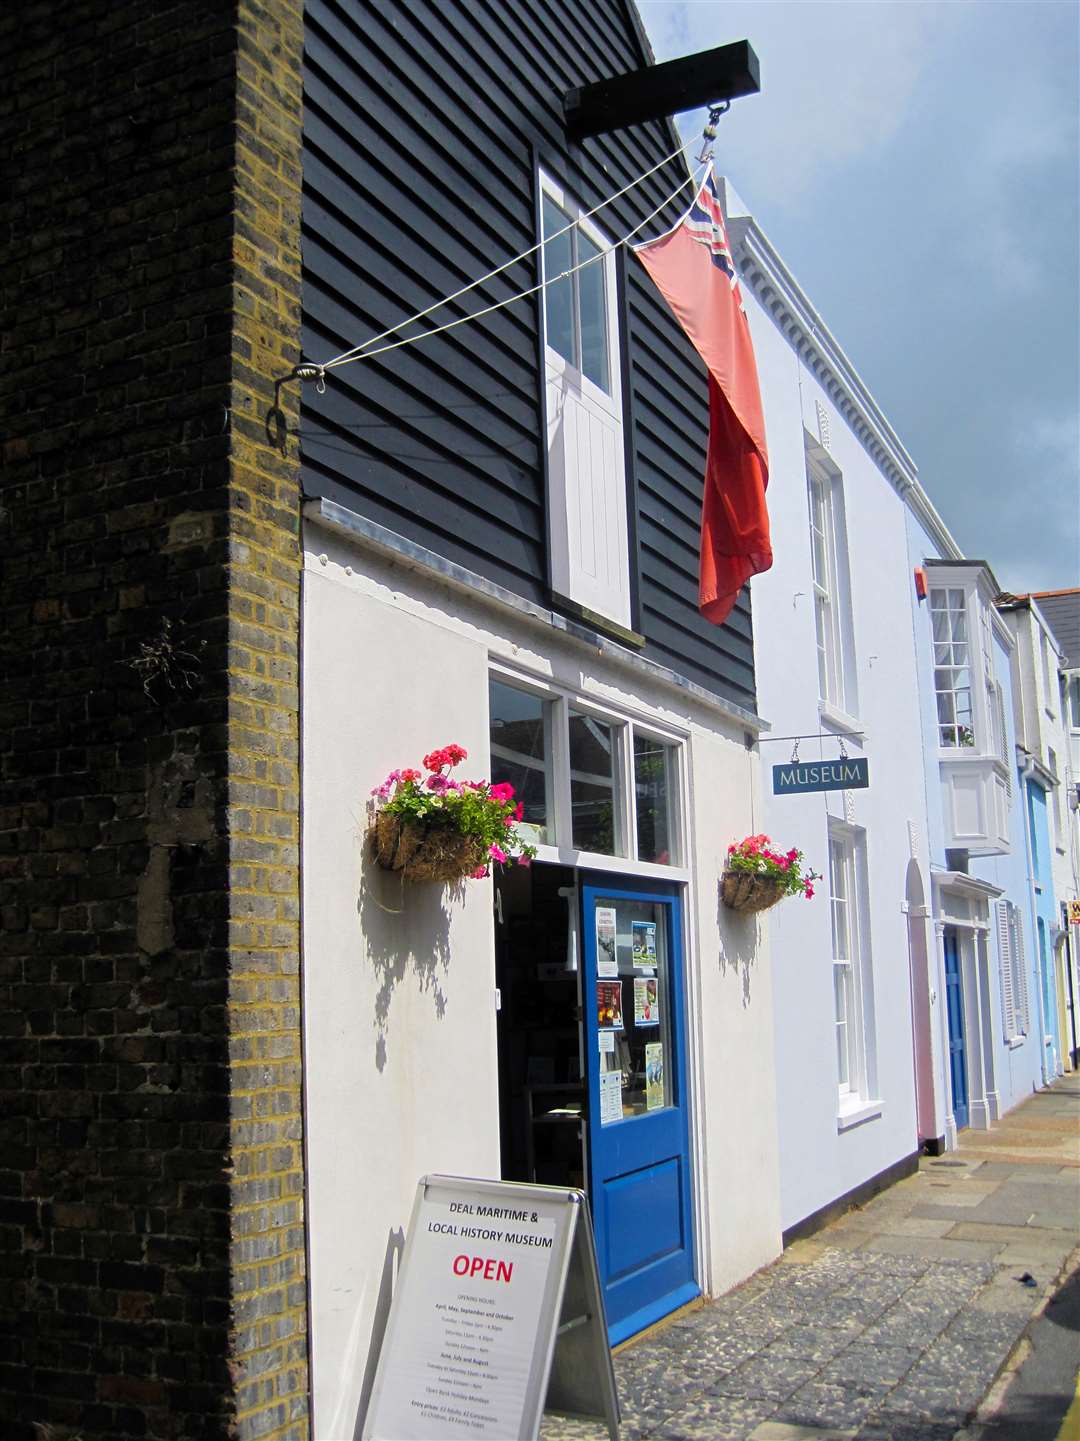 Deal Maritime and Local History Museum opens for the season on Good Friday (1248736)